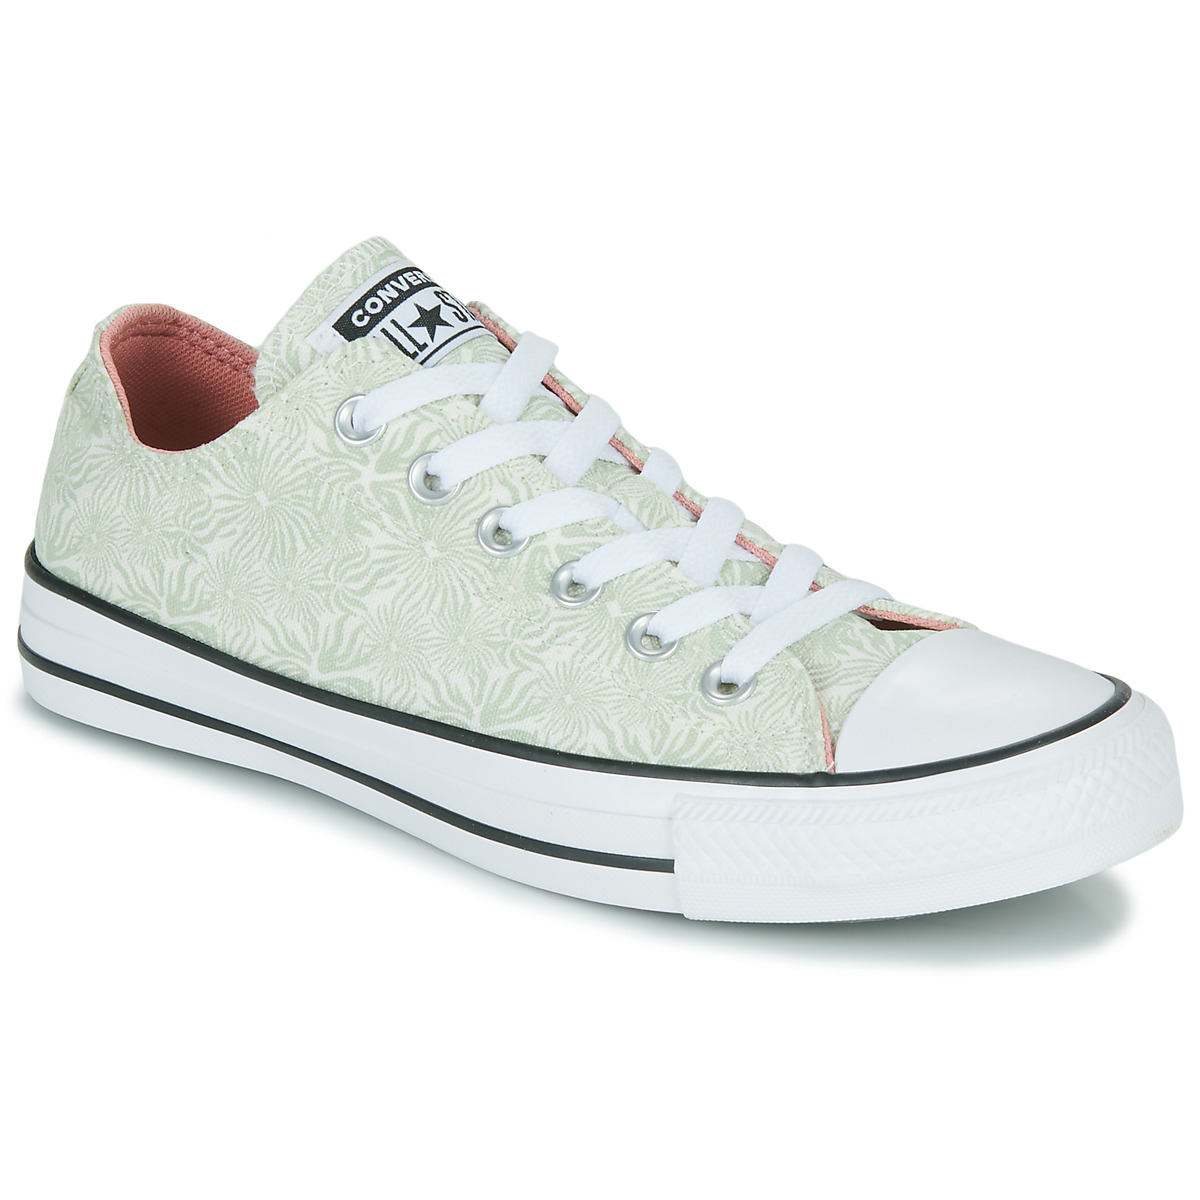 Xαμηλά Sneakers Converse CHUCK TAYLOR ALL STAR FLORAL OX